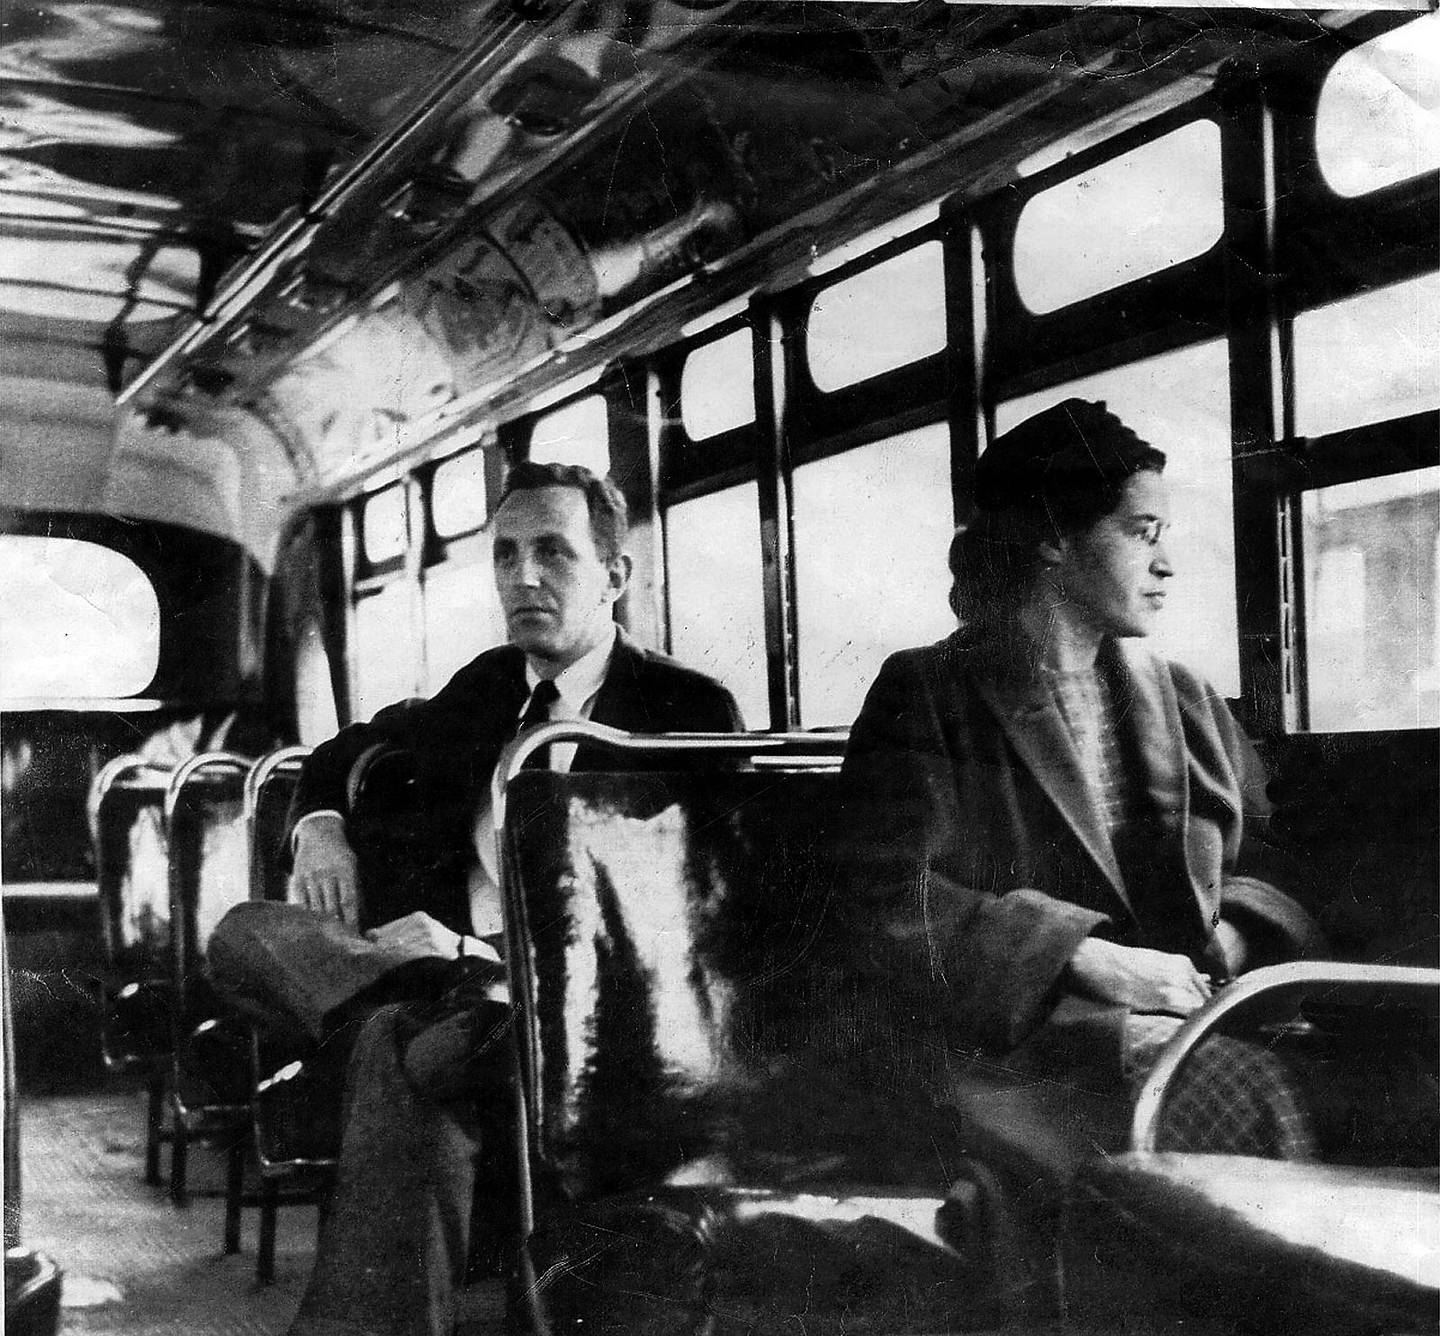 File - This undated file photo shows Rosa Parks riding on the Montgomery Area Transit System bus in Montgomery, Ala. Parks refused to give up her seat on a Montgomery bus Dec. 1, 1955, and ignited the boycott that led to a federal court ruling against segregation in public transportation. The 60th anniversary of a bus boycott is widely credited with helping spark the modern civil rights movement. (AP Photo/Daily Advertiser, File)